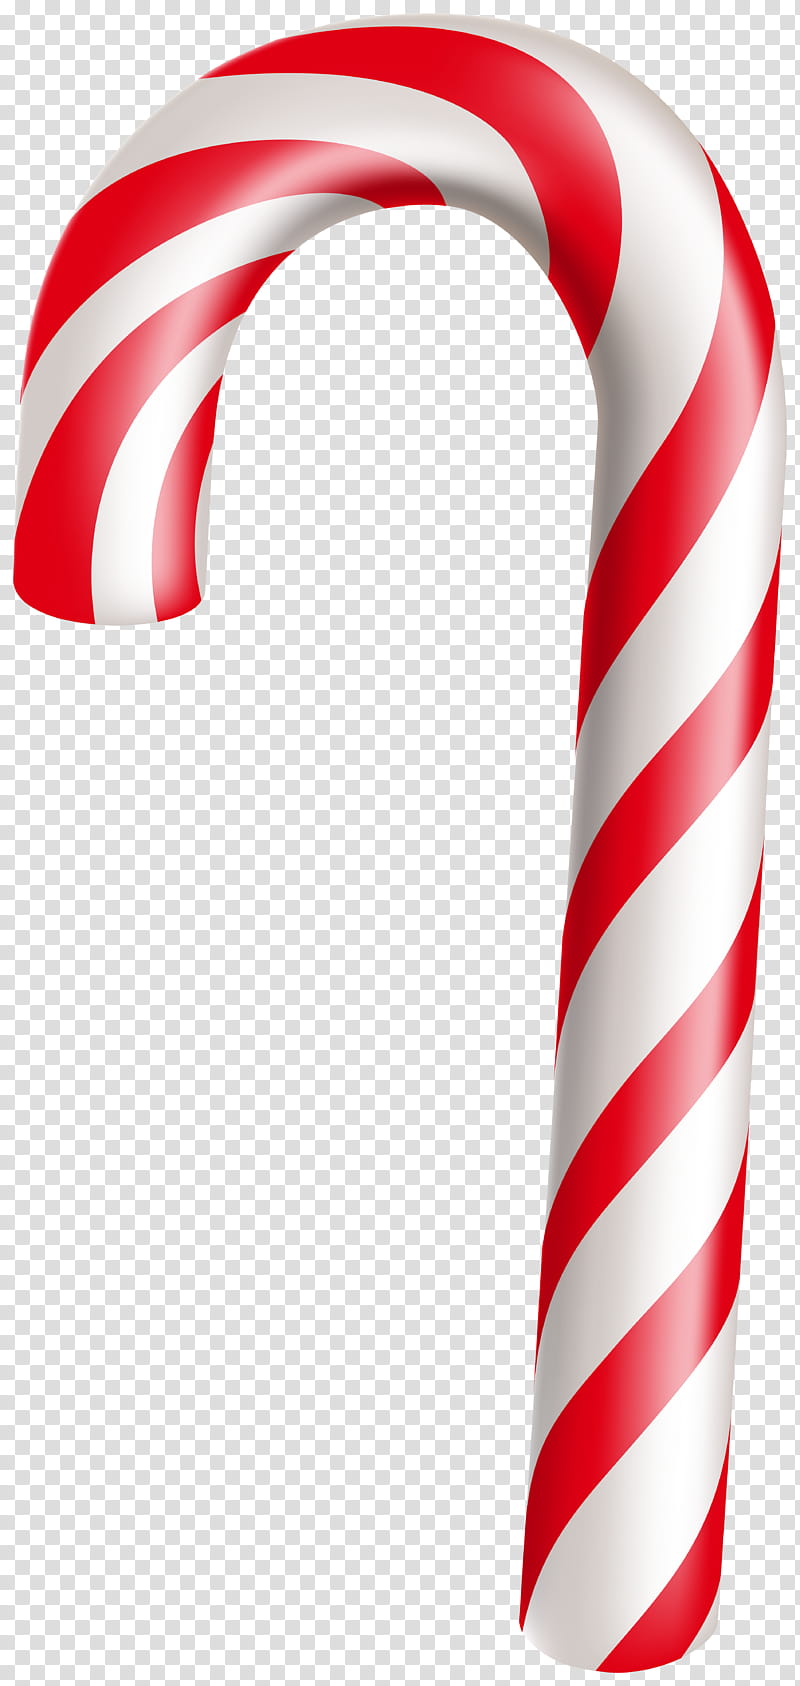 Christmas And New Year, Candy Cane, Christmas Graphics, Christmas Day, Polkagris, Christmas , Holiday, Event transparent background PNG clipart